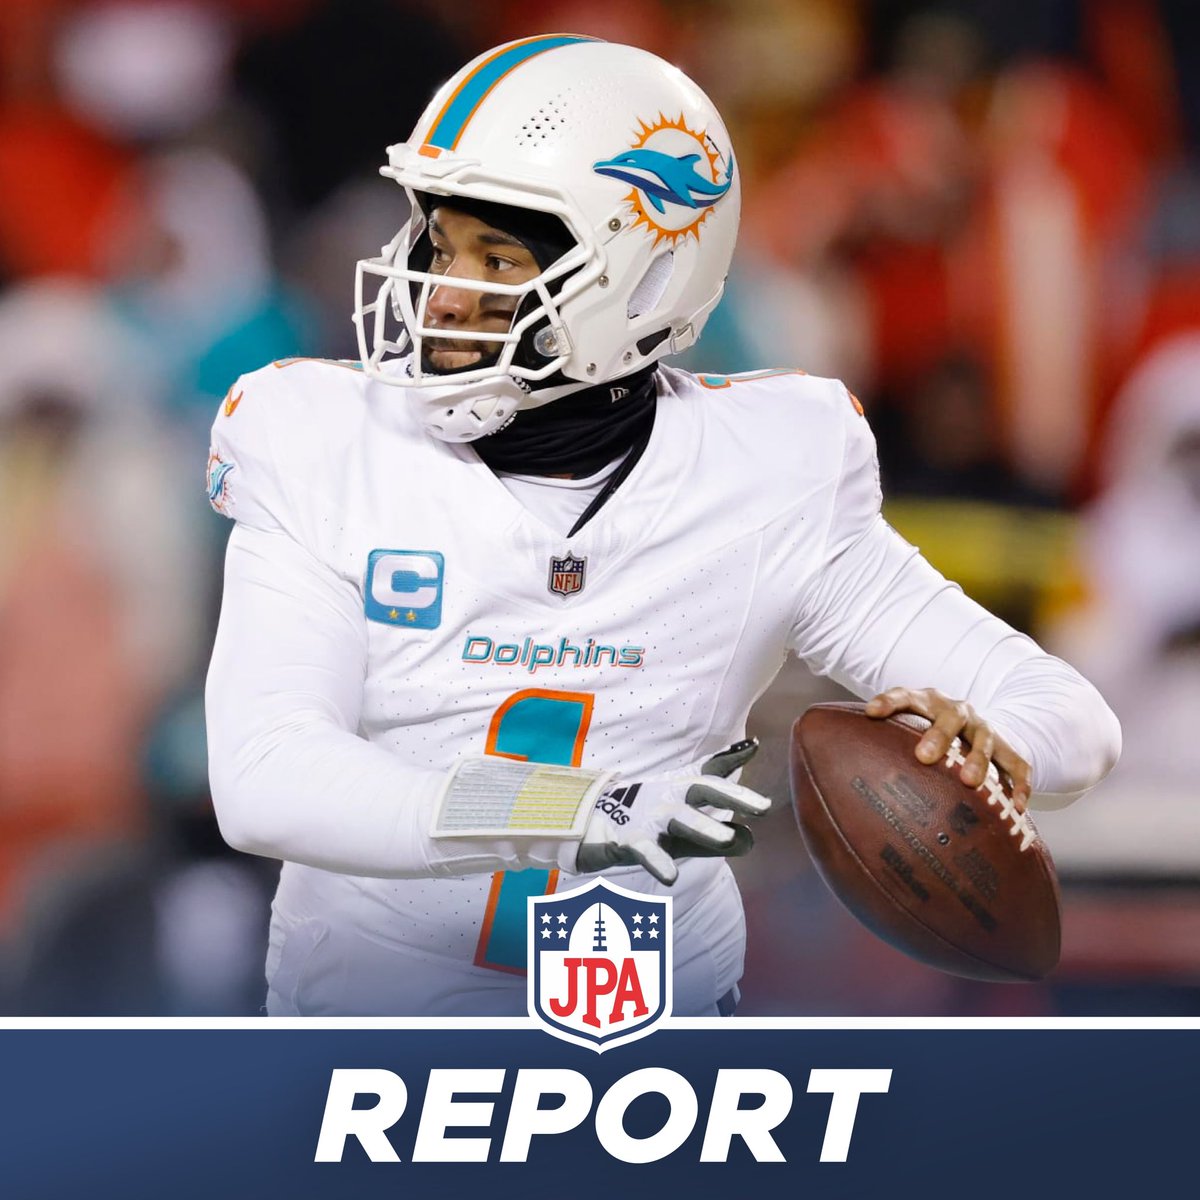 𝗥𝗘𝗣𝗢𝗥𝗧: #Dolphins QB Tua Tagovailoa has missed “most” of the team’s voluntary offseason work since April 15, likely related to his contract status, per @jjones9 Tua is due for a new contract and it could eclipse the deal Jared Goff just received.